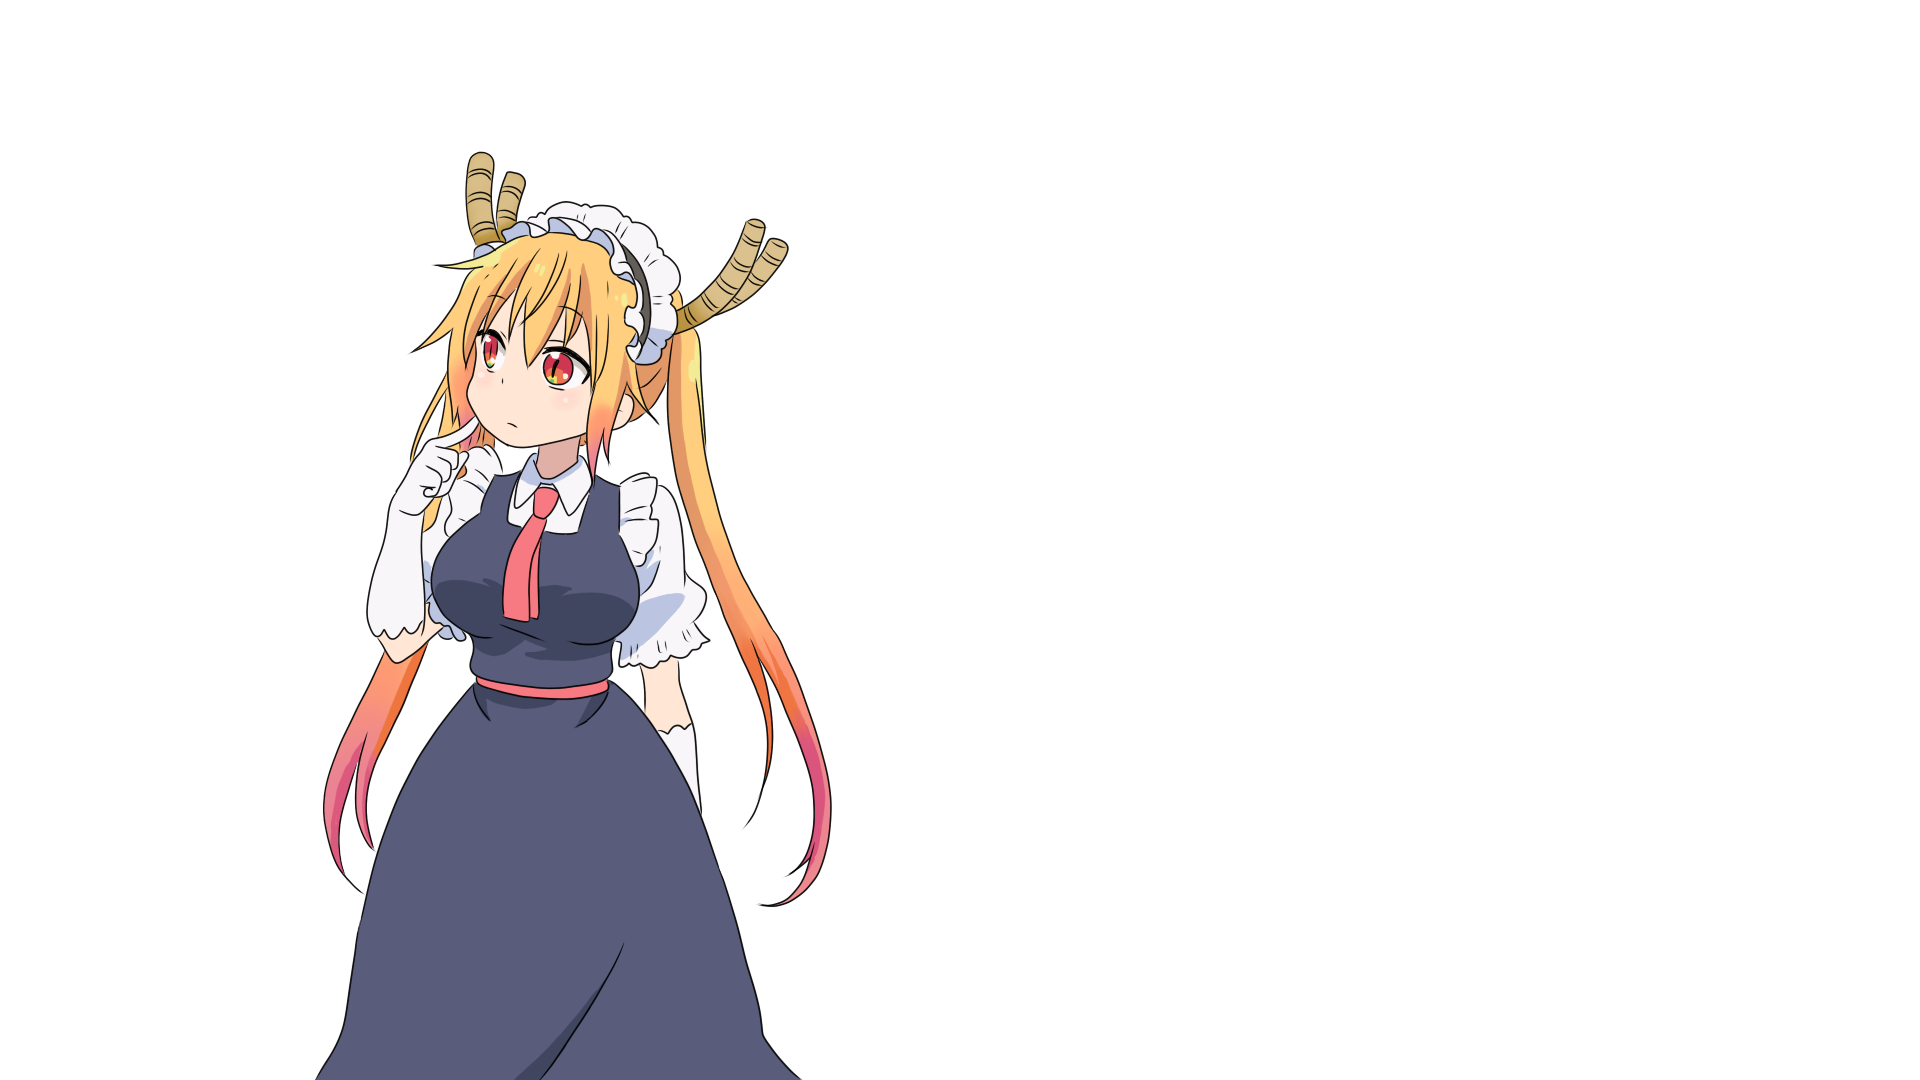 maid HD Wallpaper, background